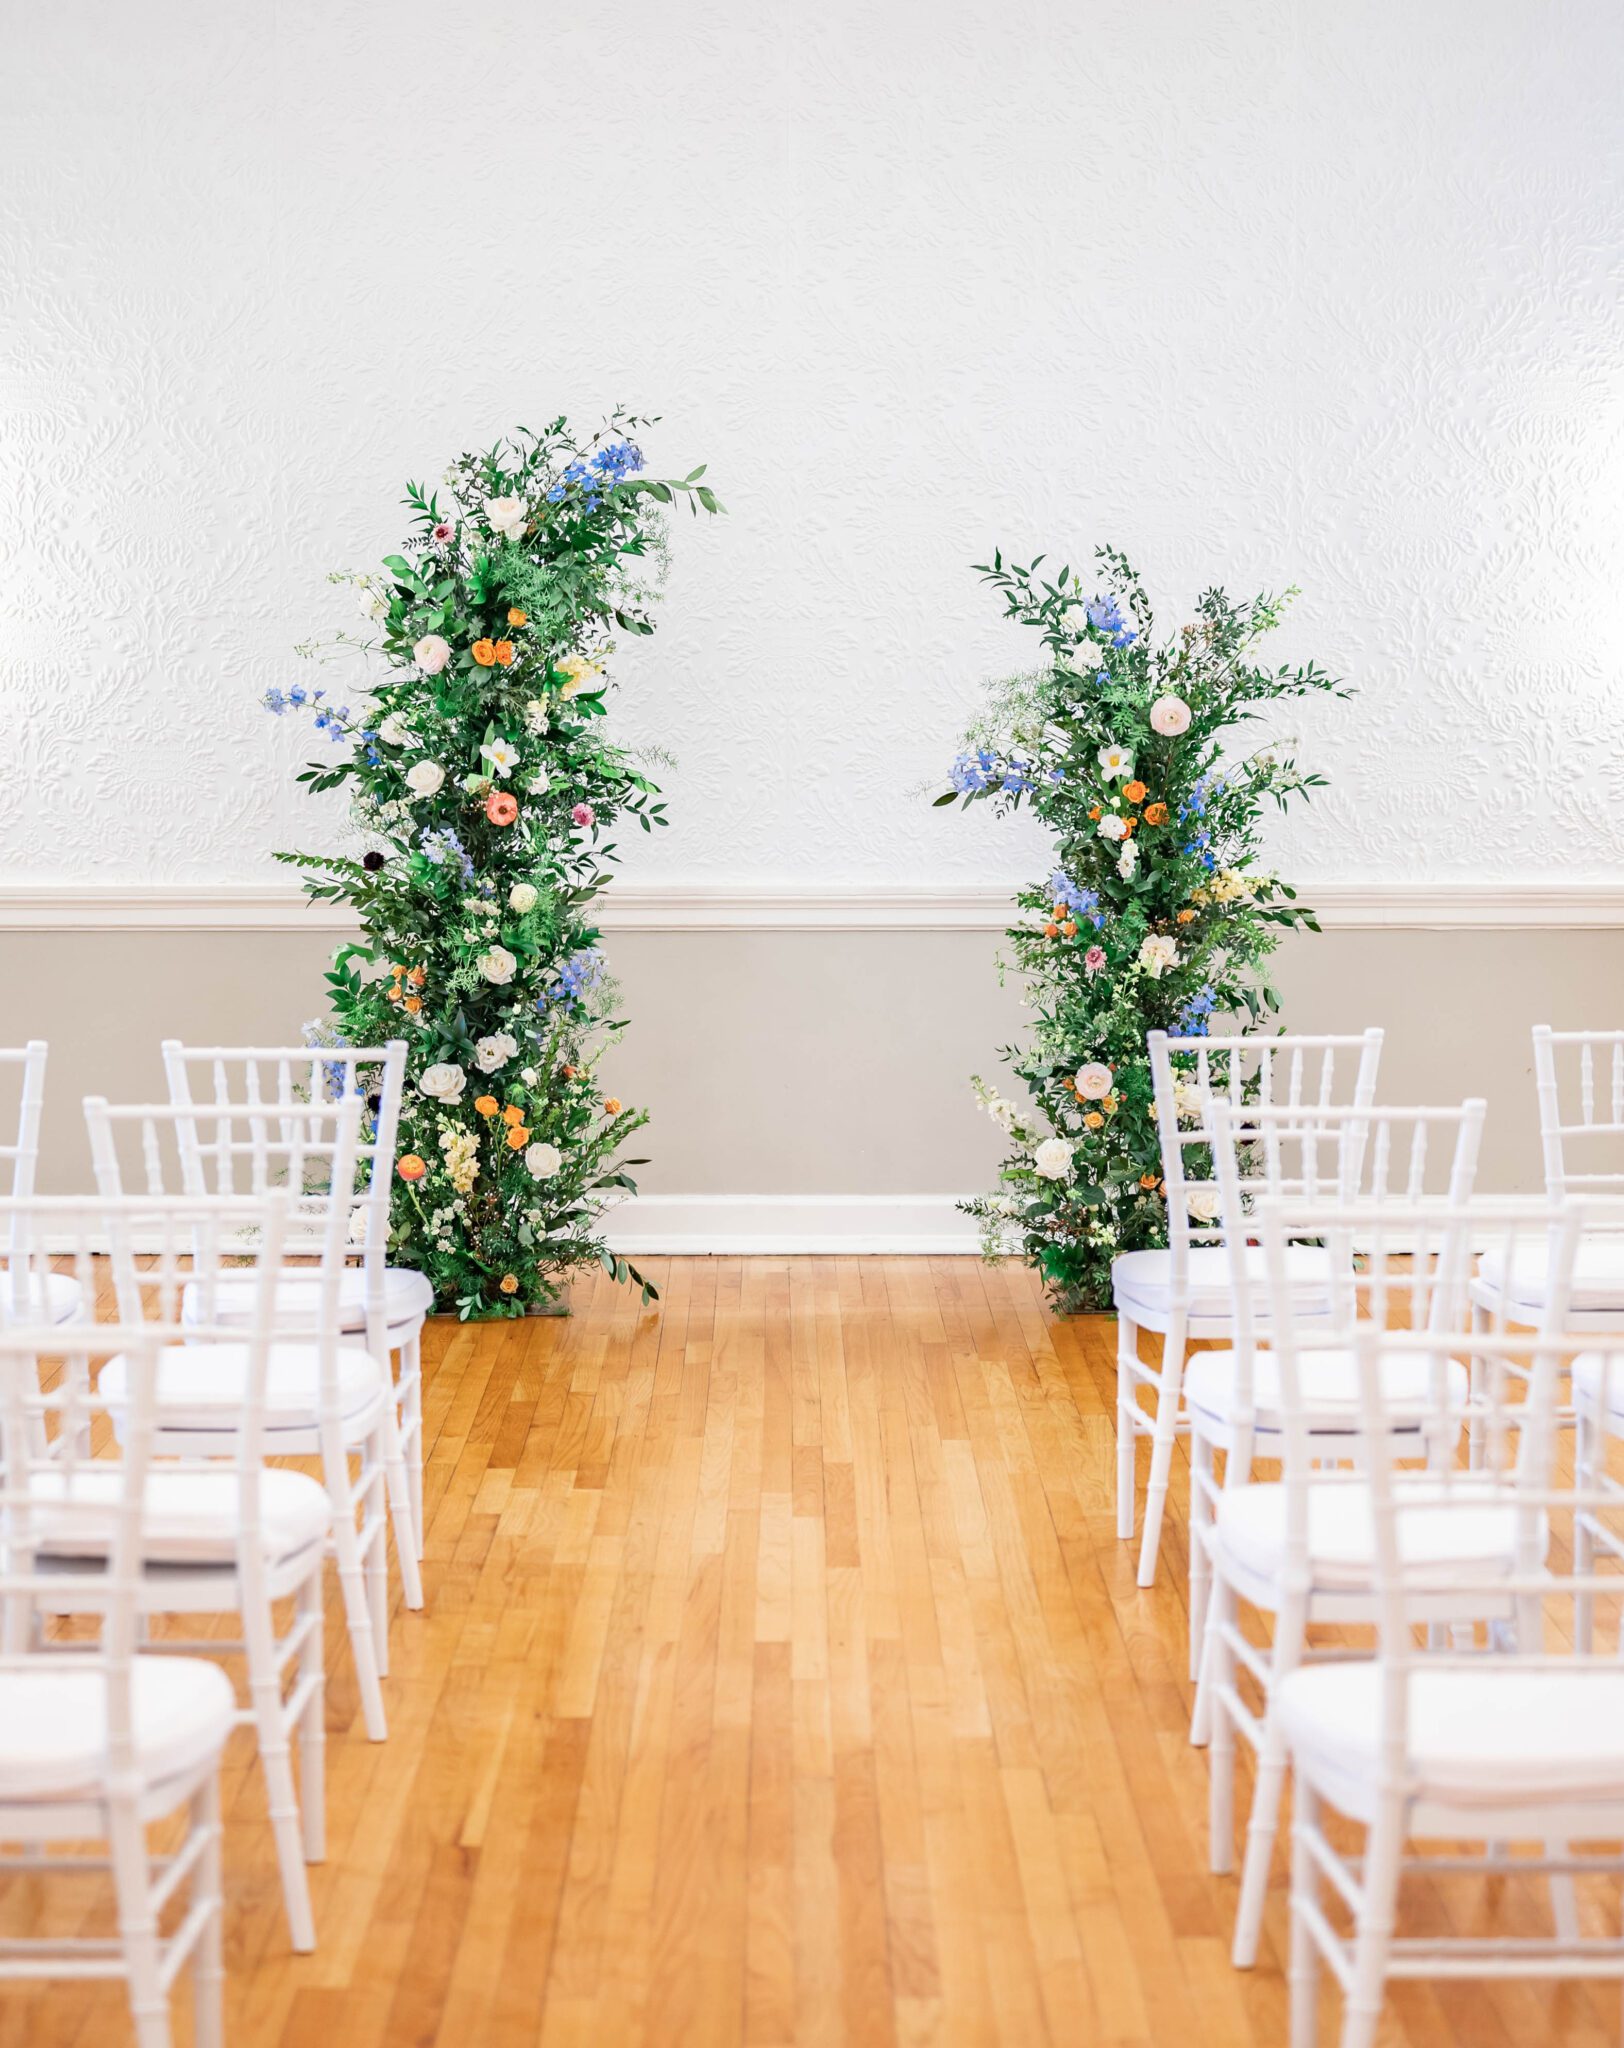 Stunning column floral arch with lush greenery as a focal point of the an indoor ceremony, whimsical and romantic pastel spring wedding inspiration, white chiavari chairs for guests during ceremony